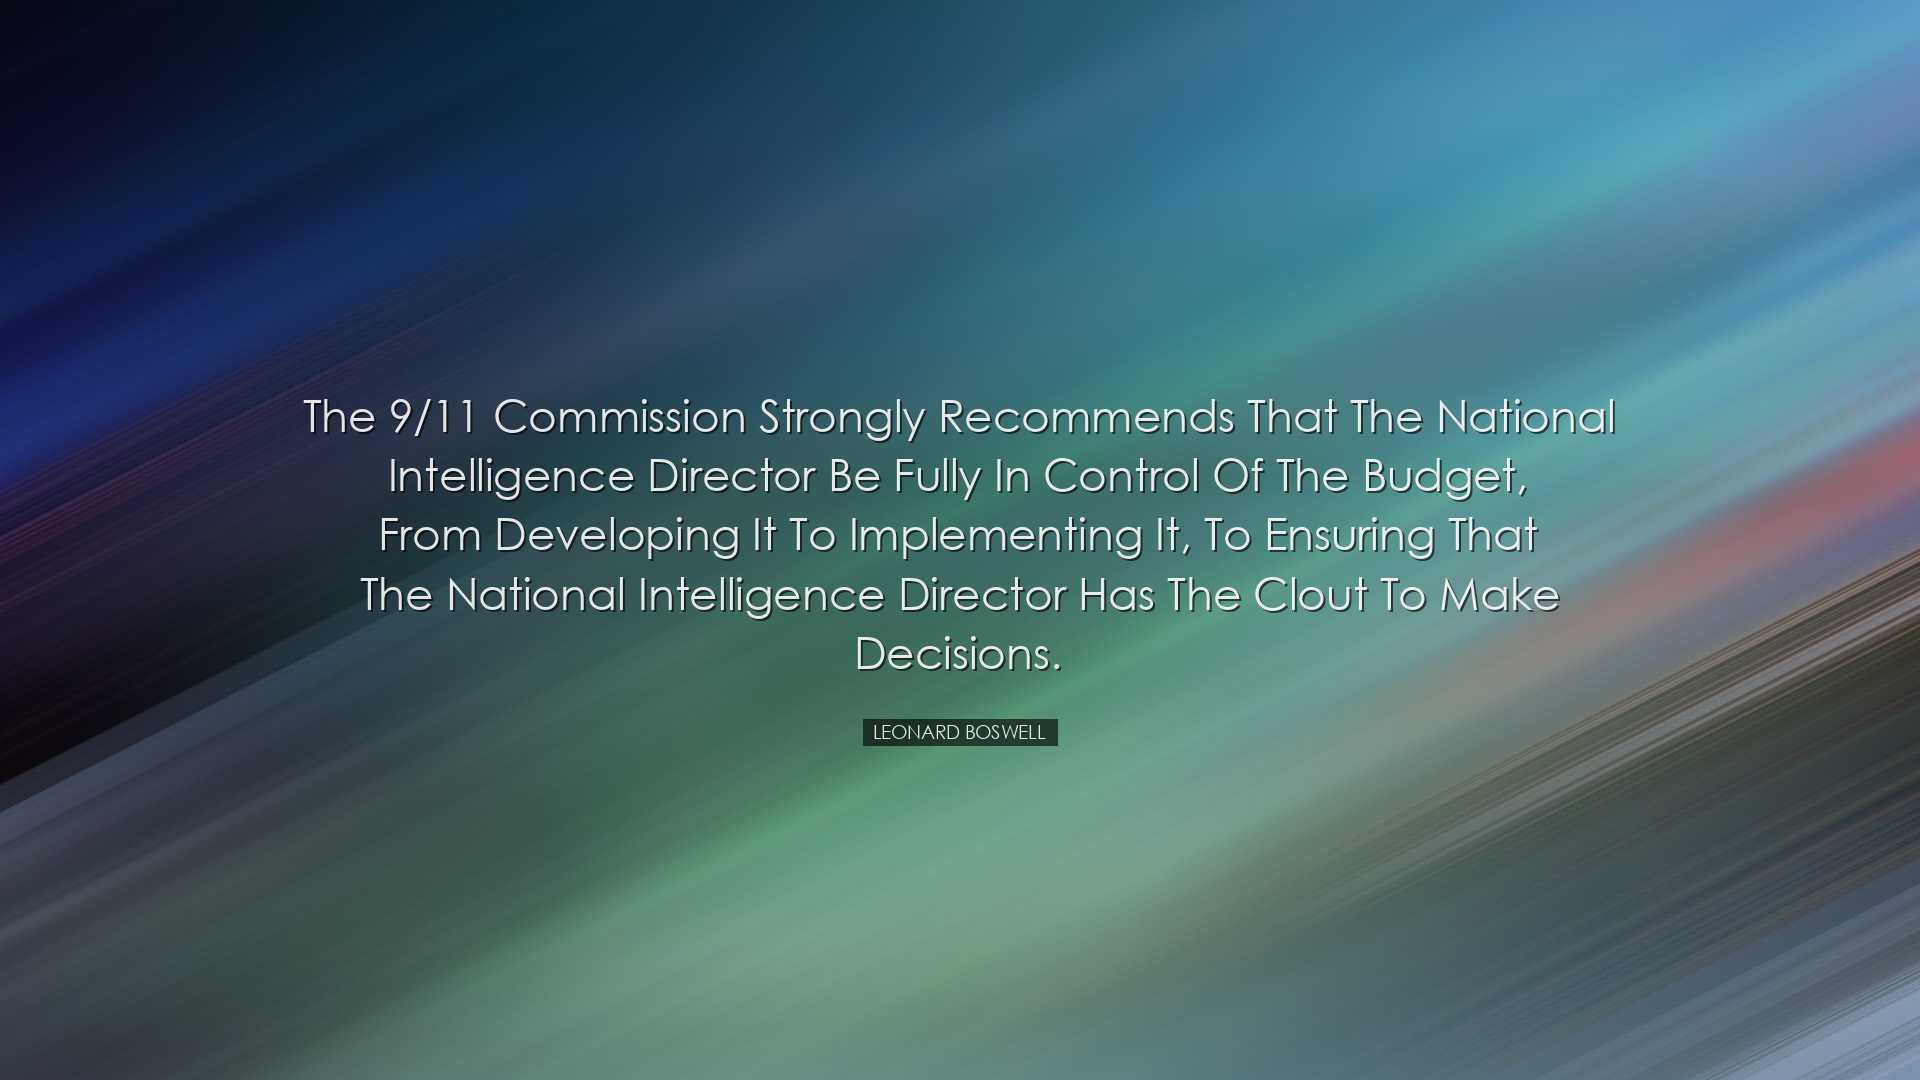 The 9/11 Commission strongly recommends that the National Intellig